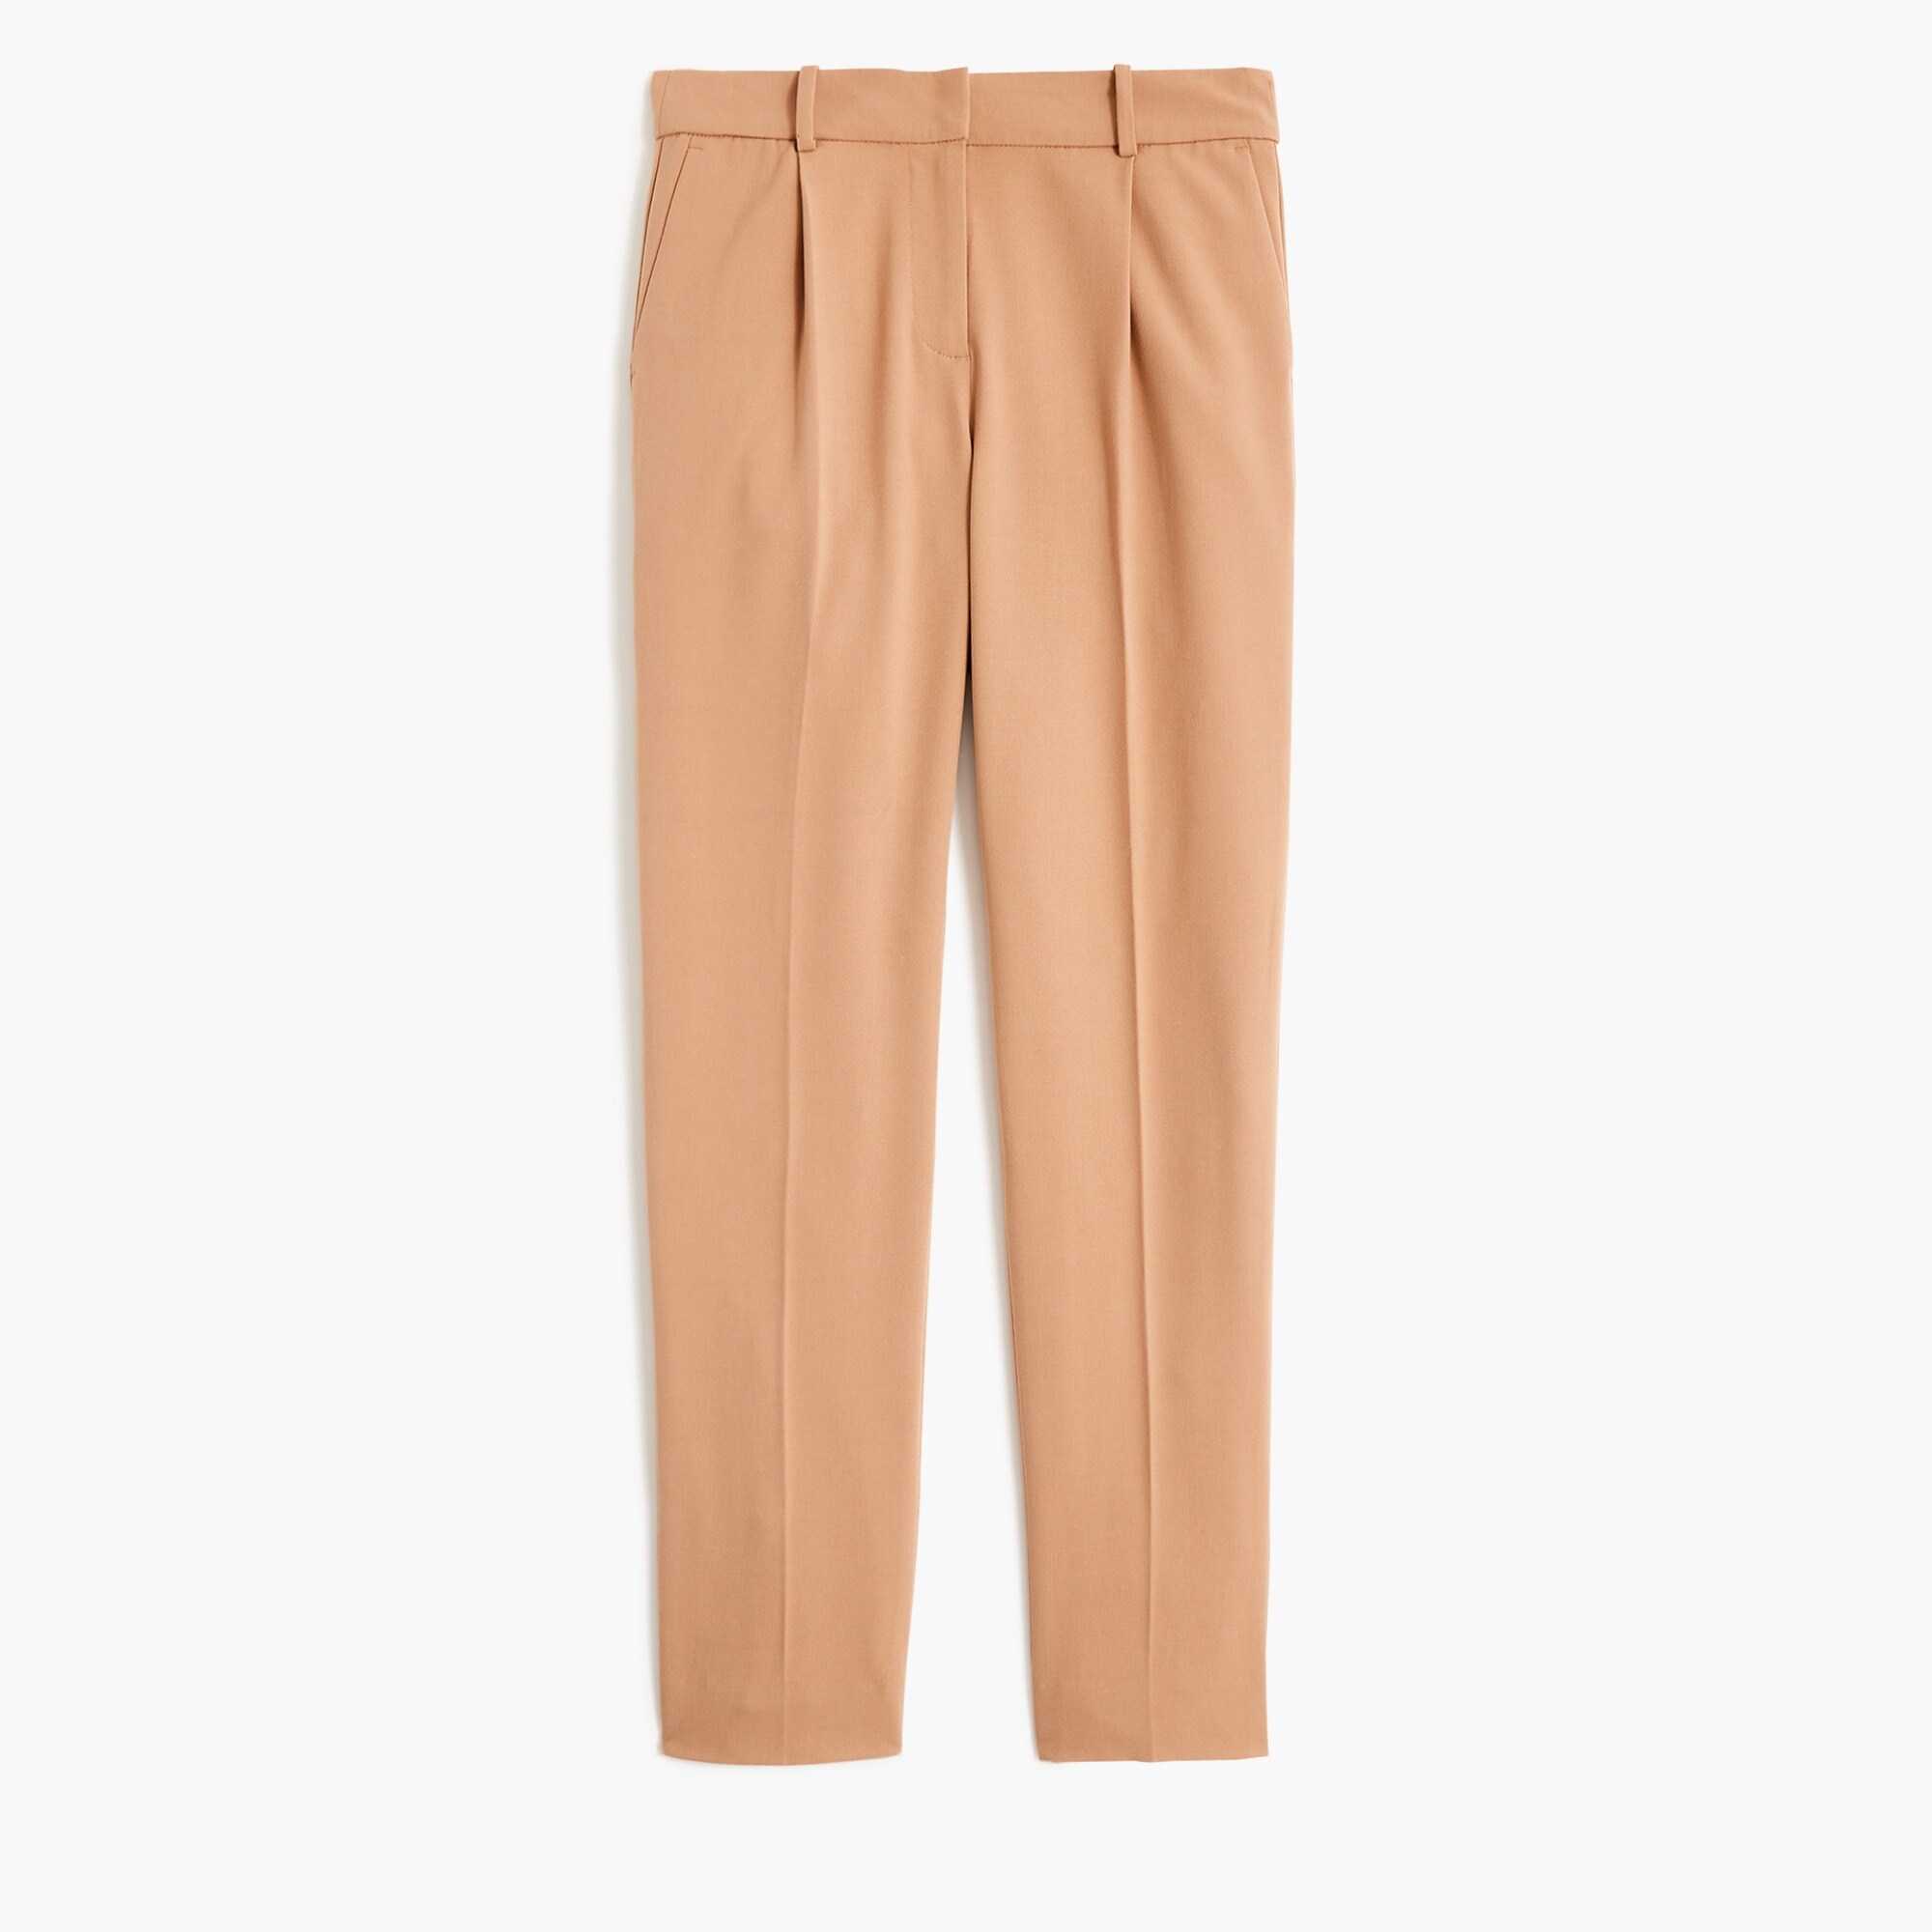  Pleated trouser